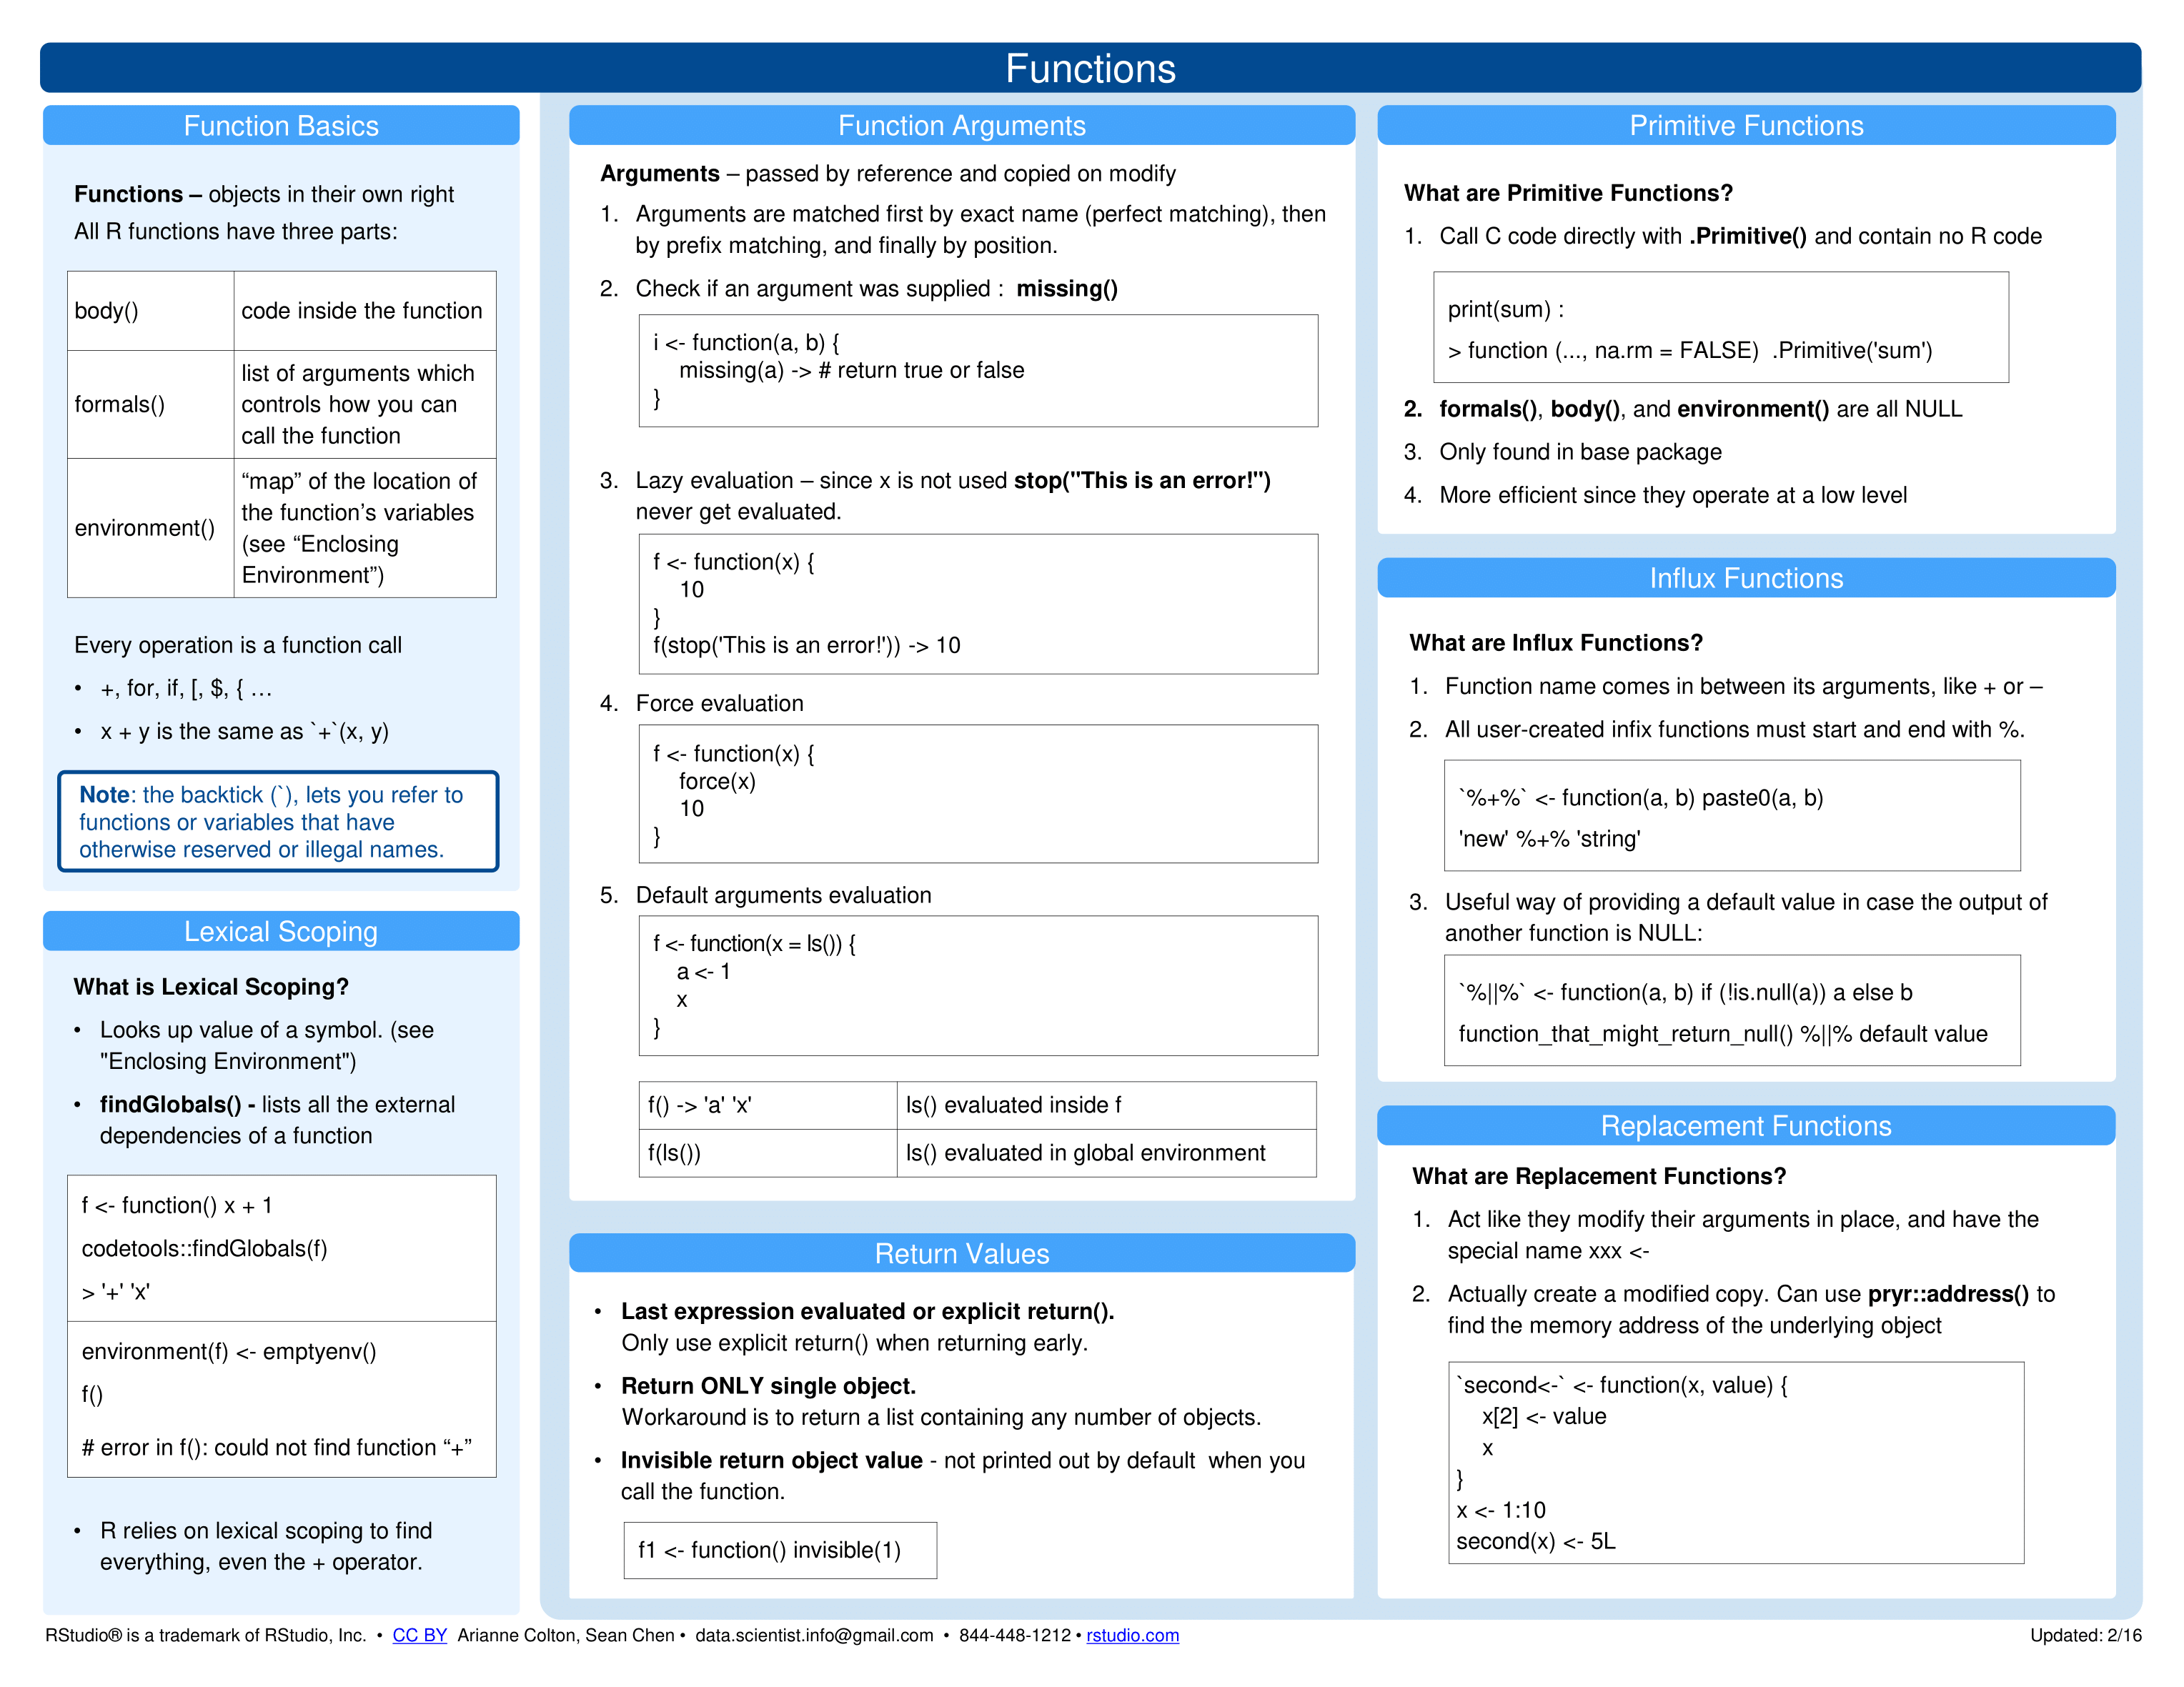 Summary on functions from the RStudio cheatsheet on Advanced R.